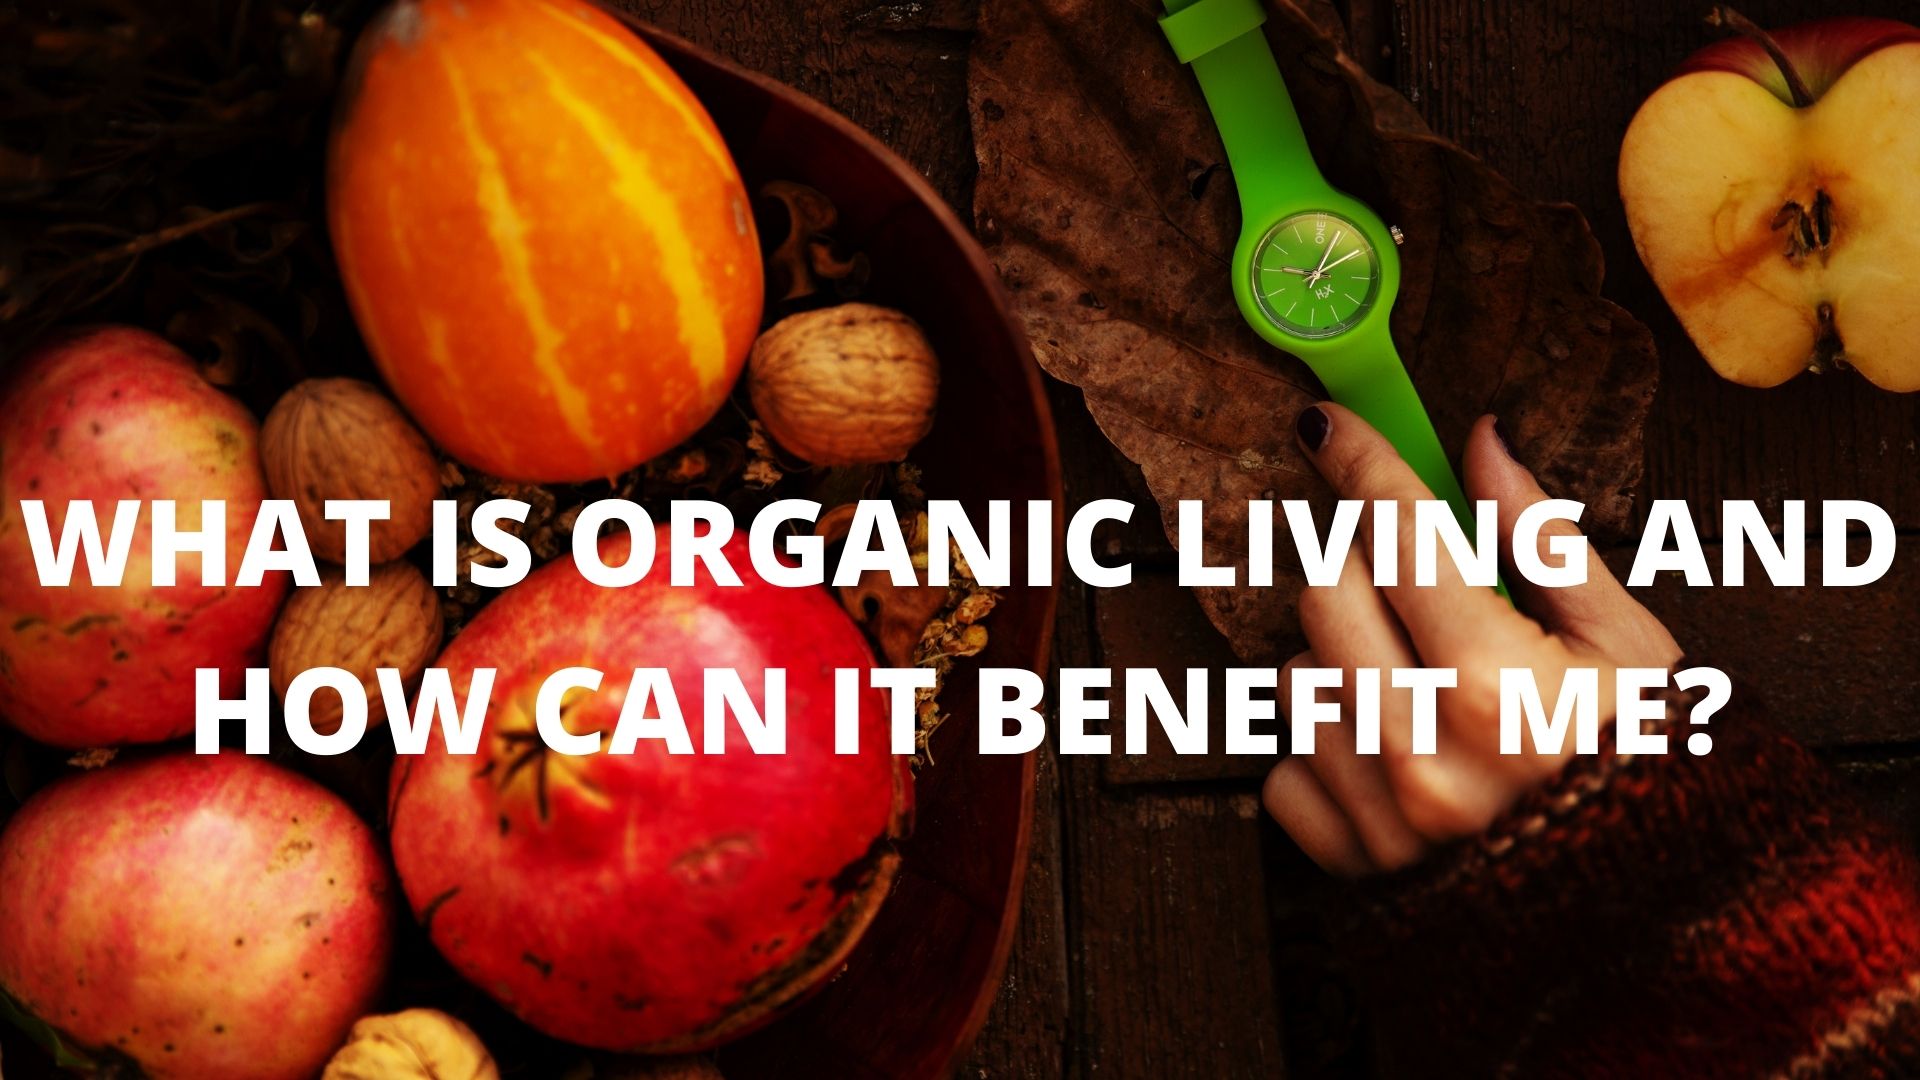 WHAT IS ORGANIC LIVING AND HOW CAN IT BENEFIT ME?